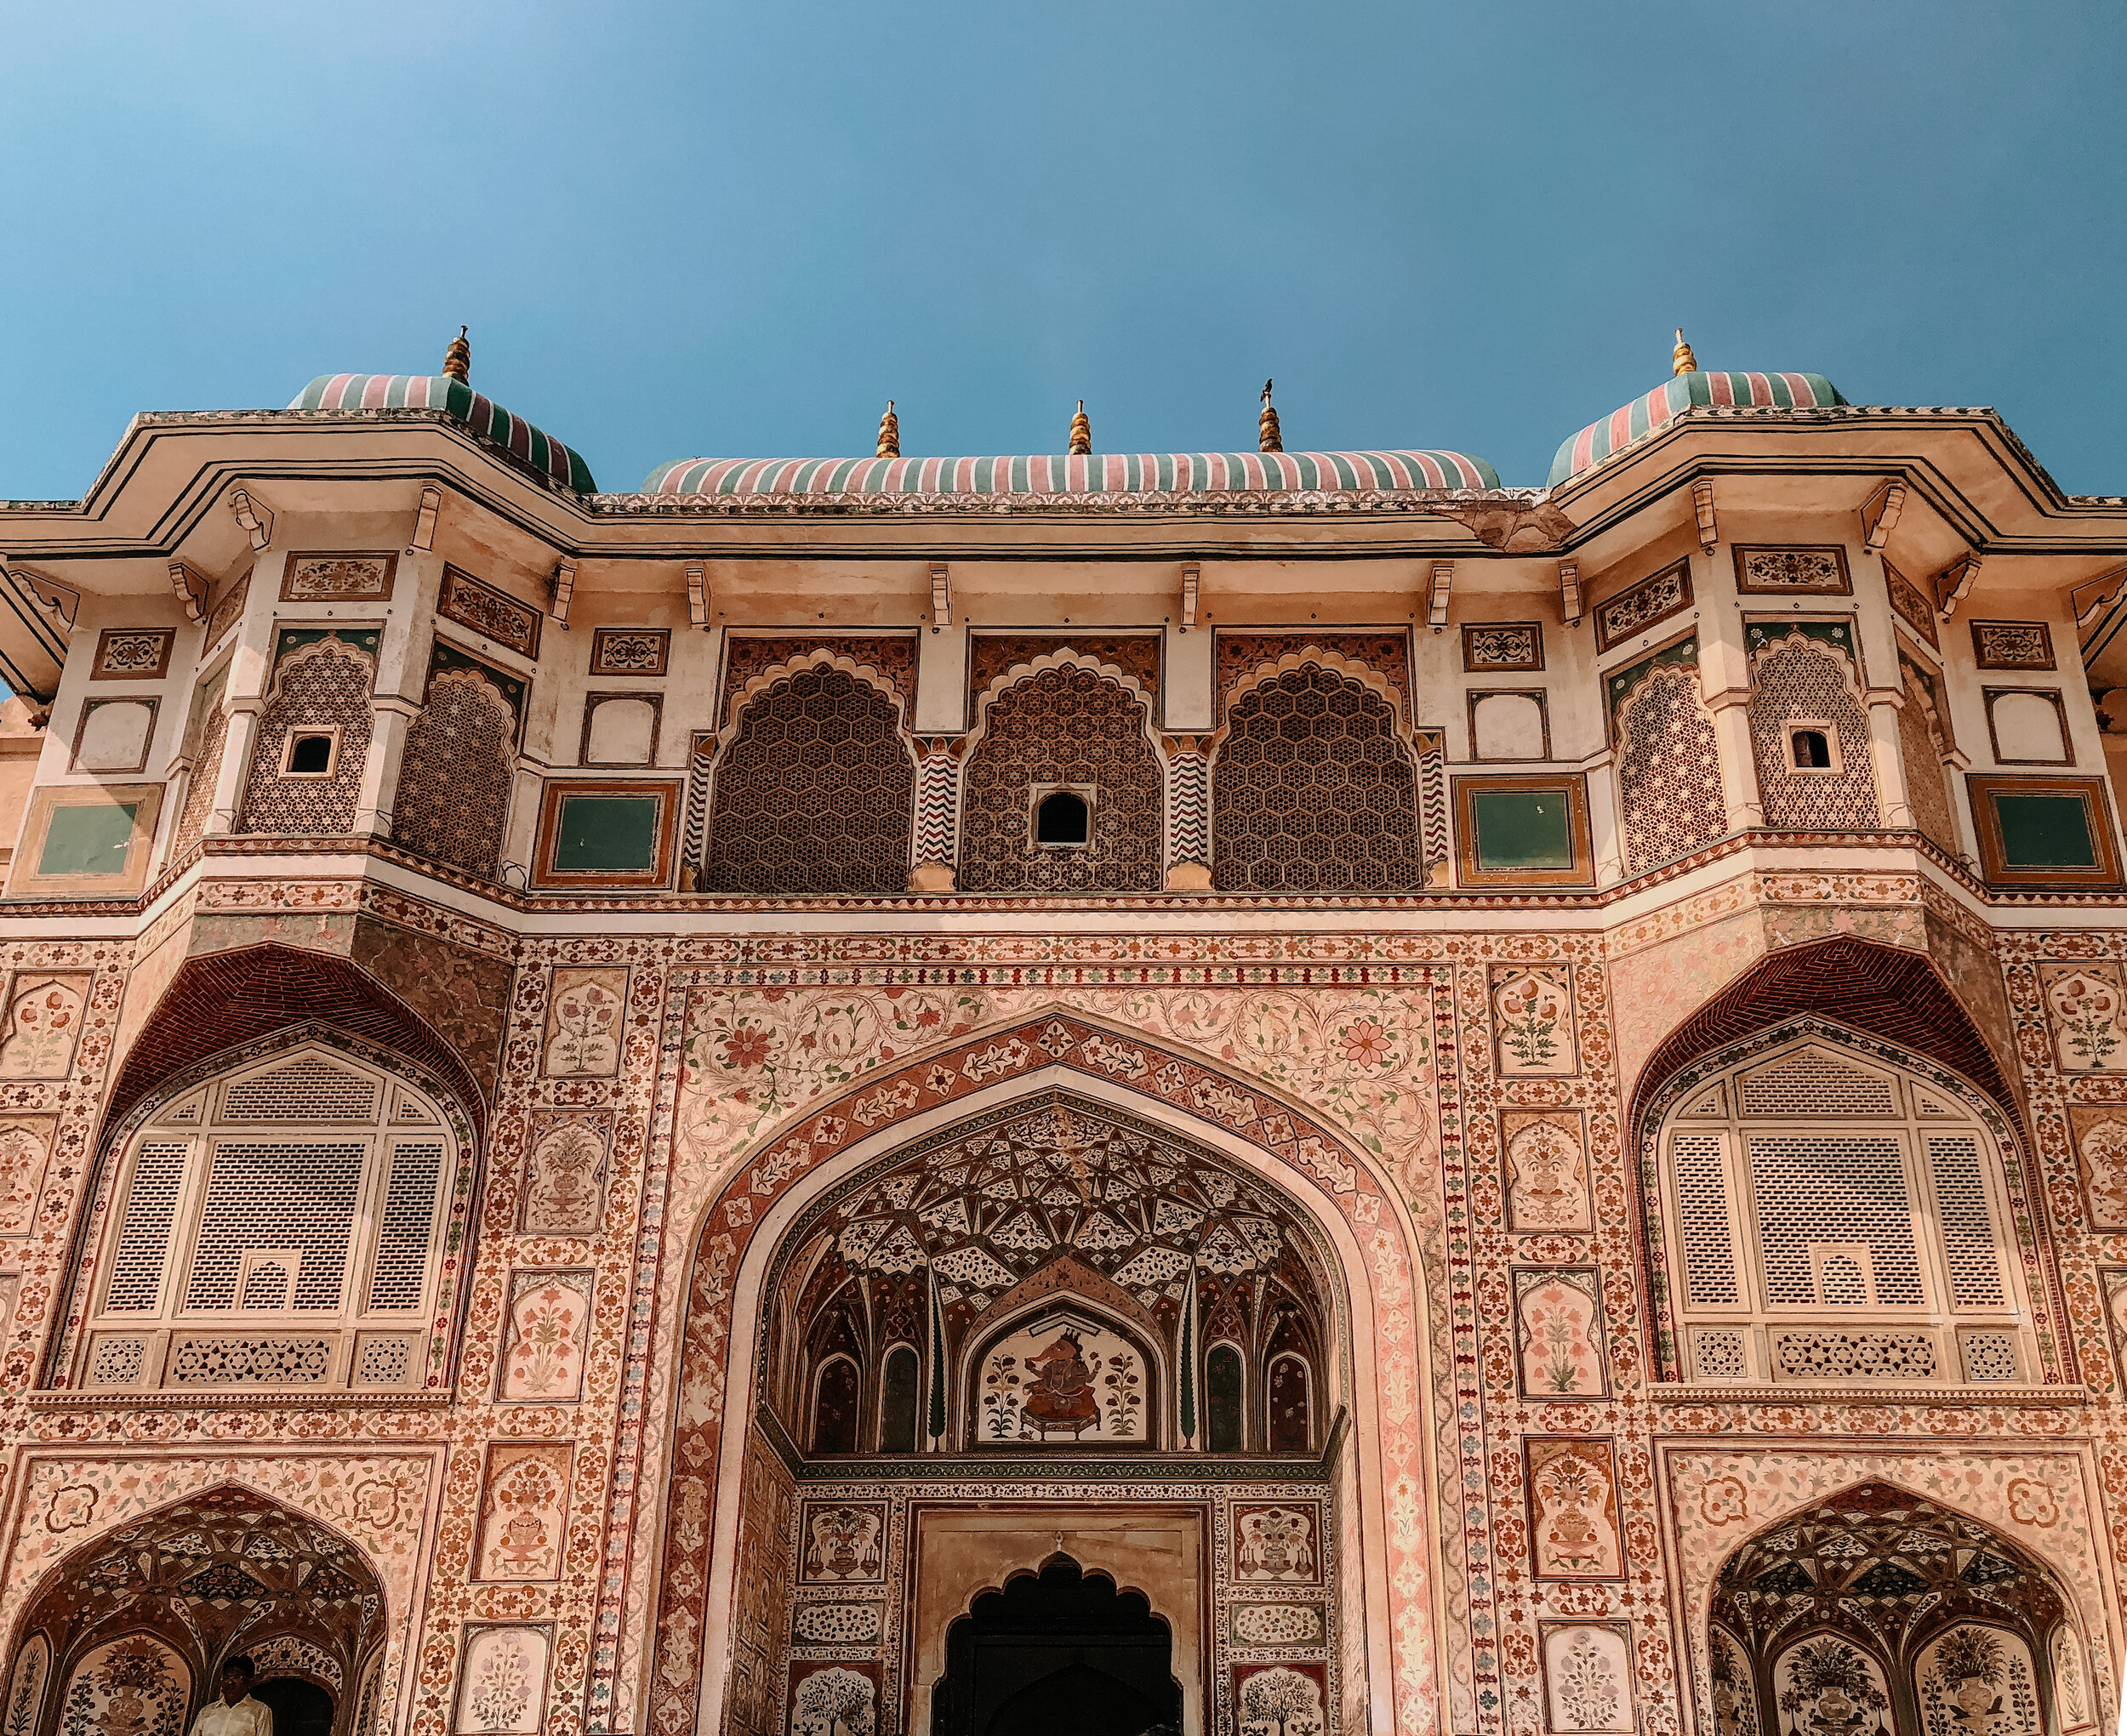 Amber Fort (Amer Fort) Hall of Mirrors - photographed by Ash Burns in Jaipur, India